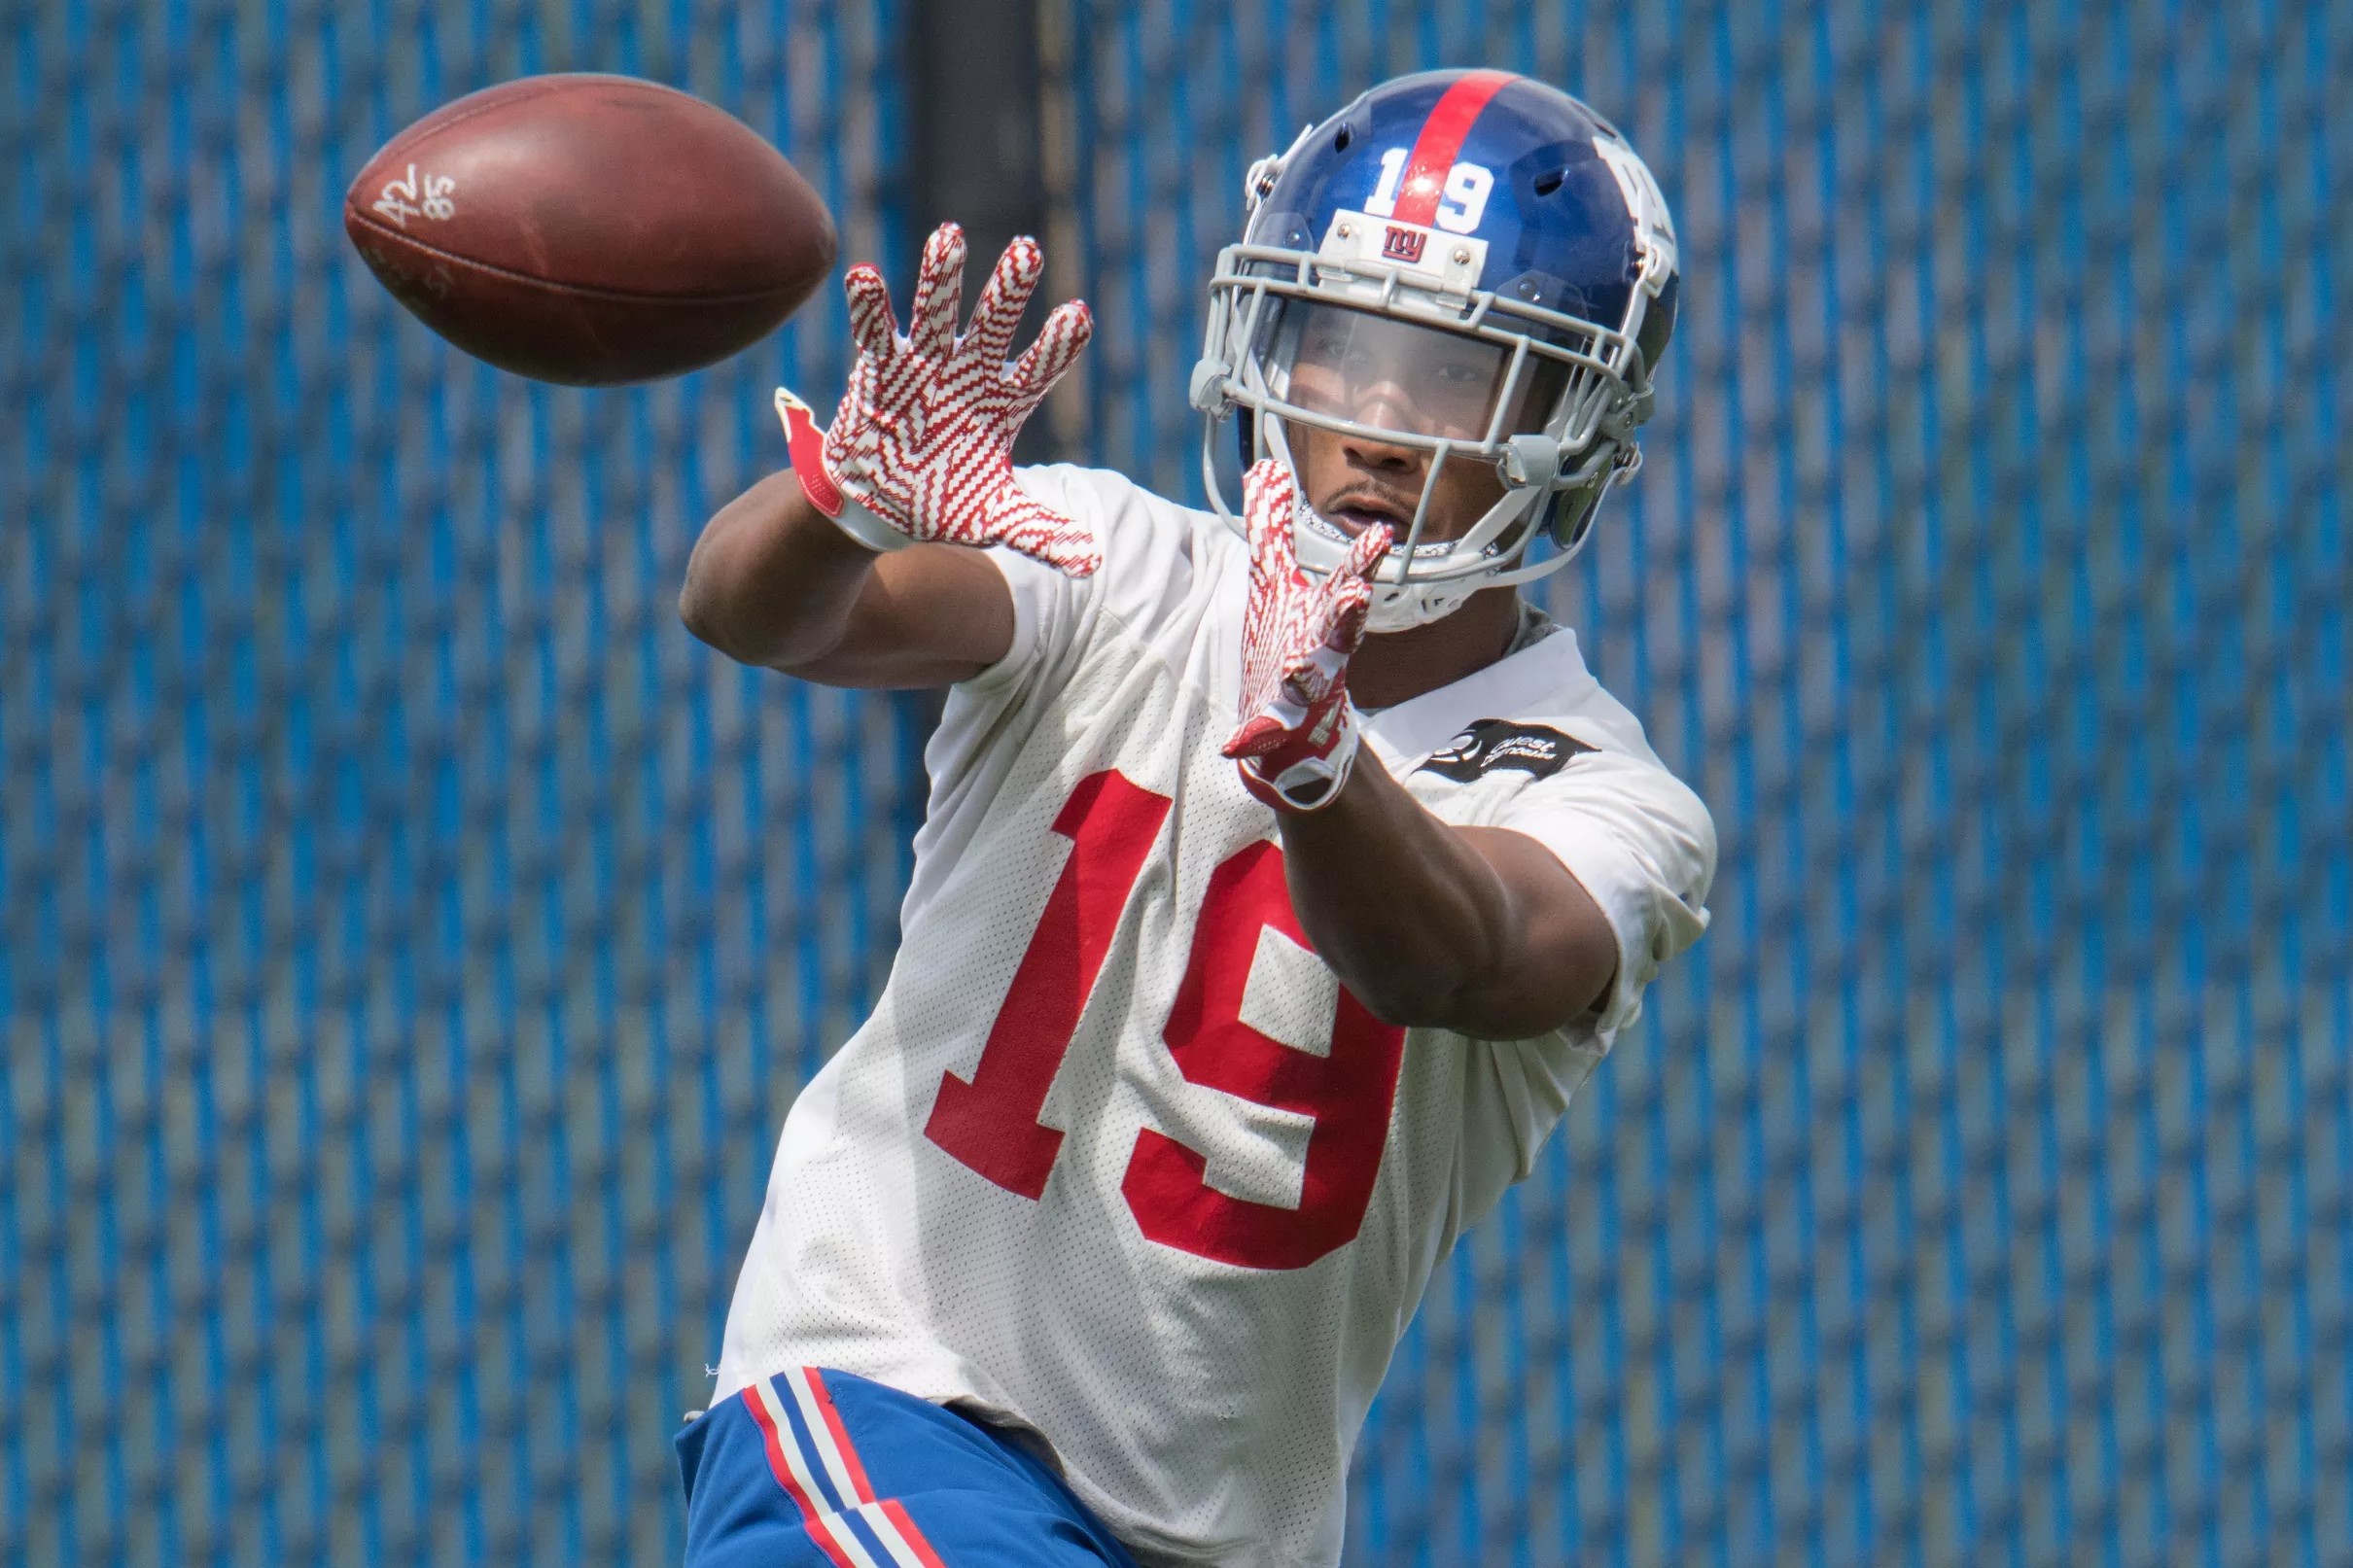 Giants’ WR Travis Rudolph facing lots of competition for roster spot